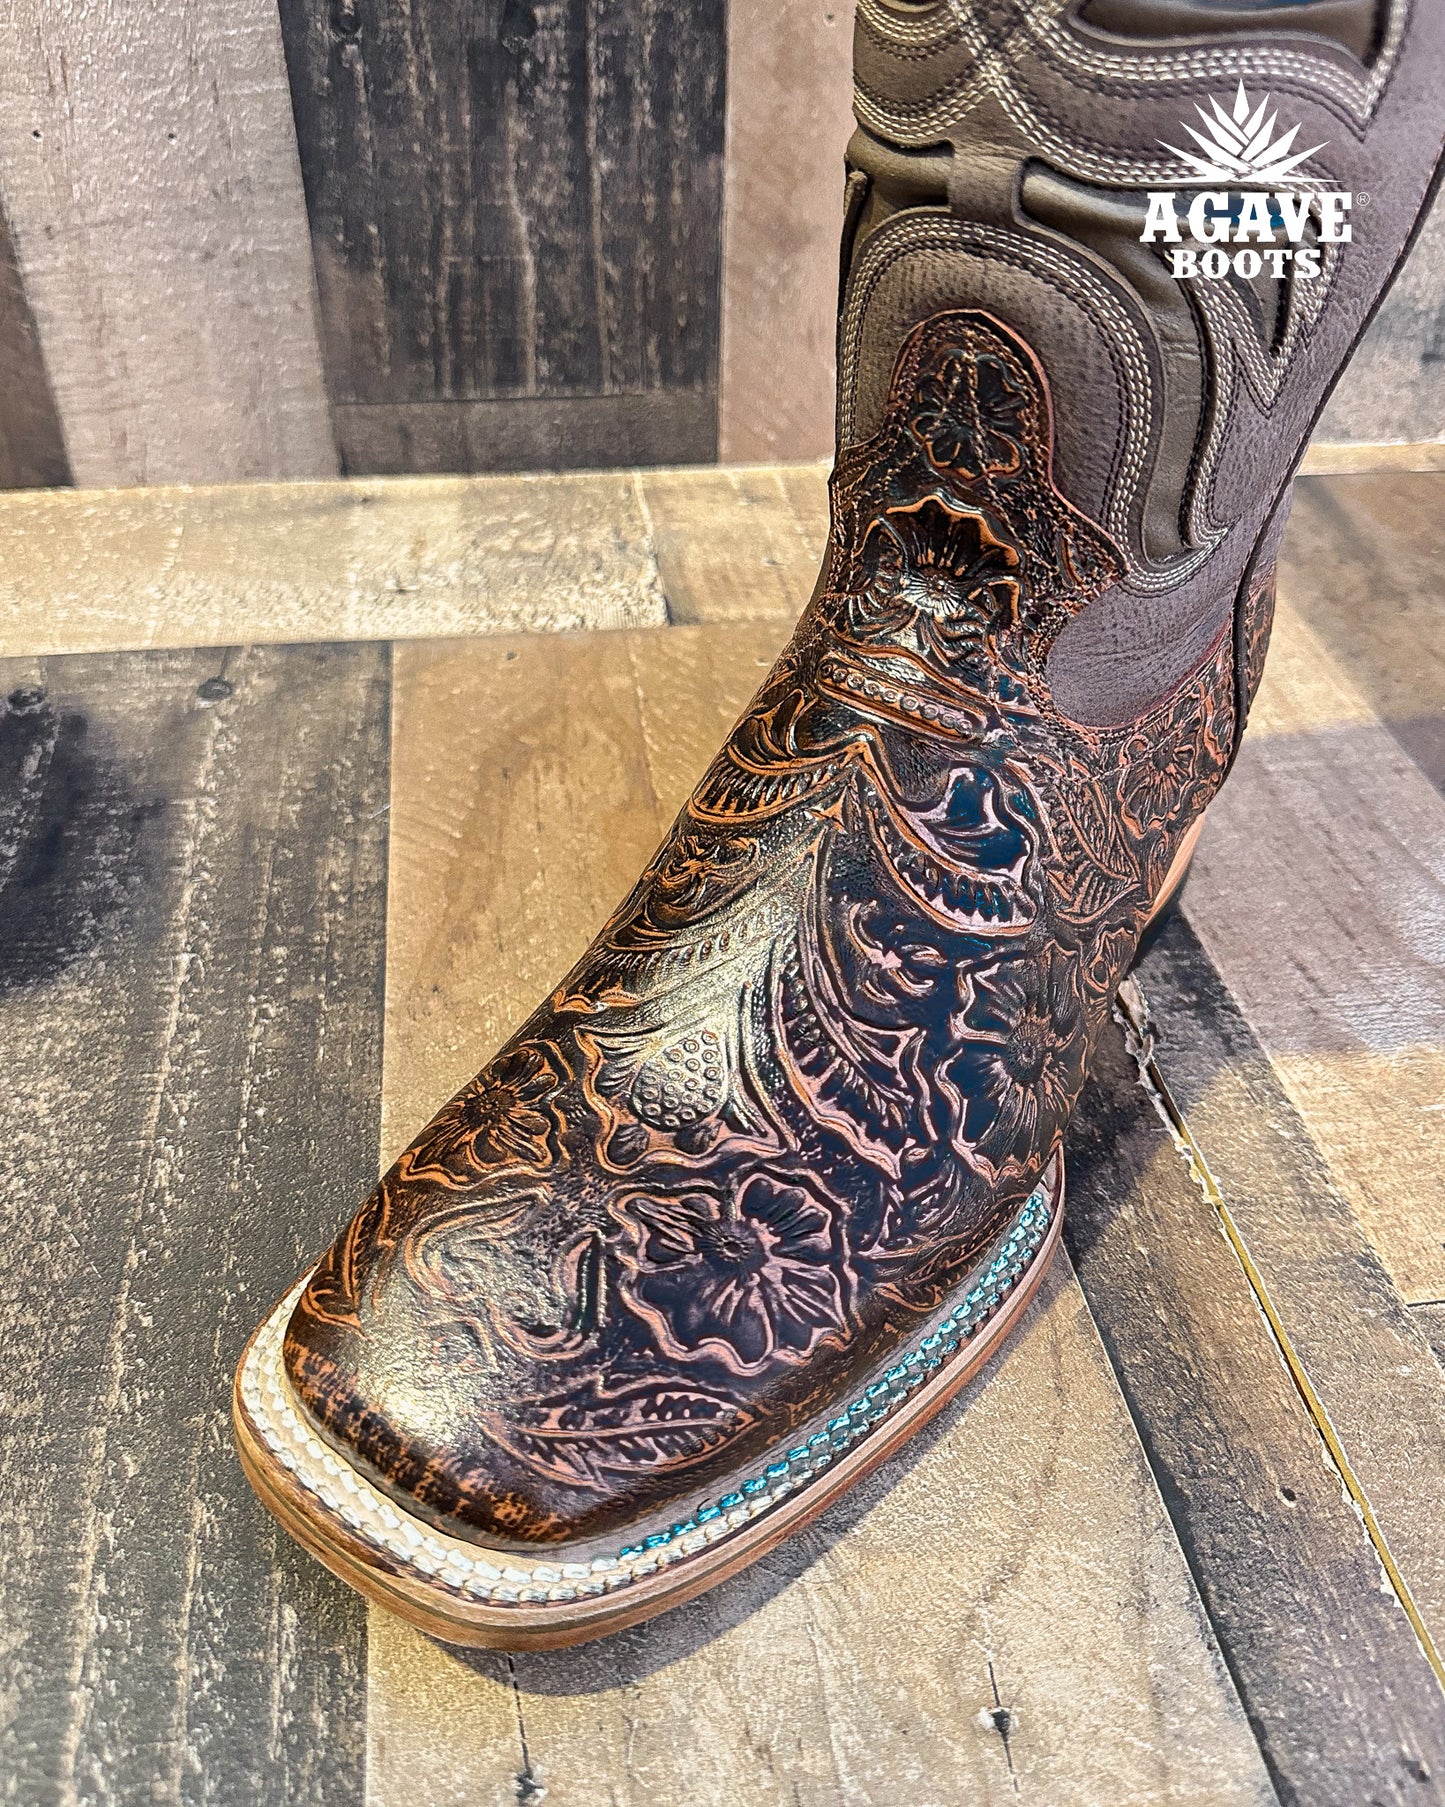 "SHEDRON" TOOLED LEATHER | MEN SQUARE TOE WESTERN COWBOY BOOTS